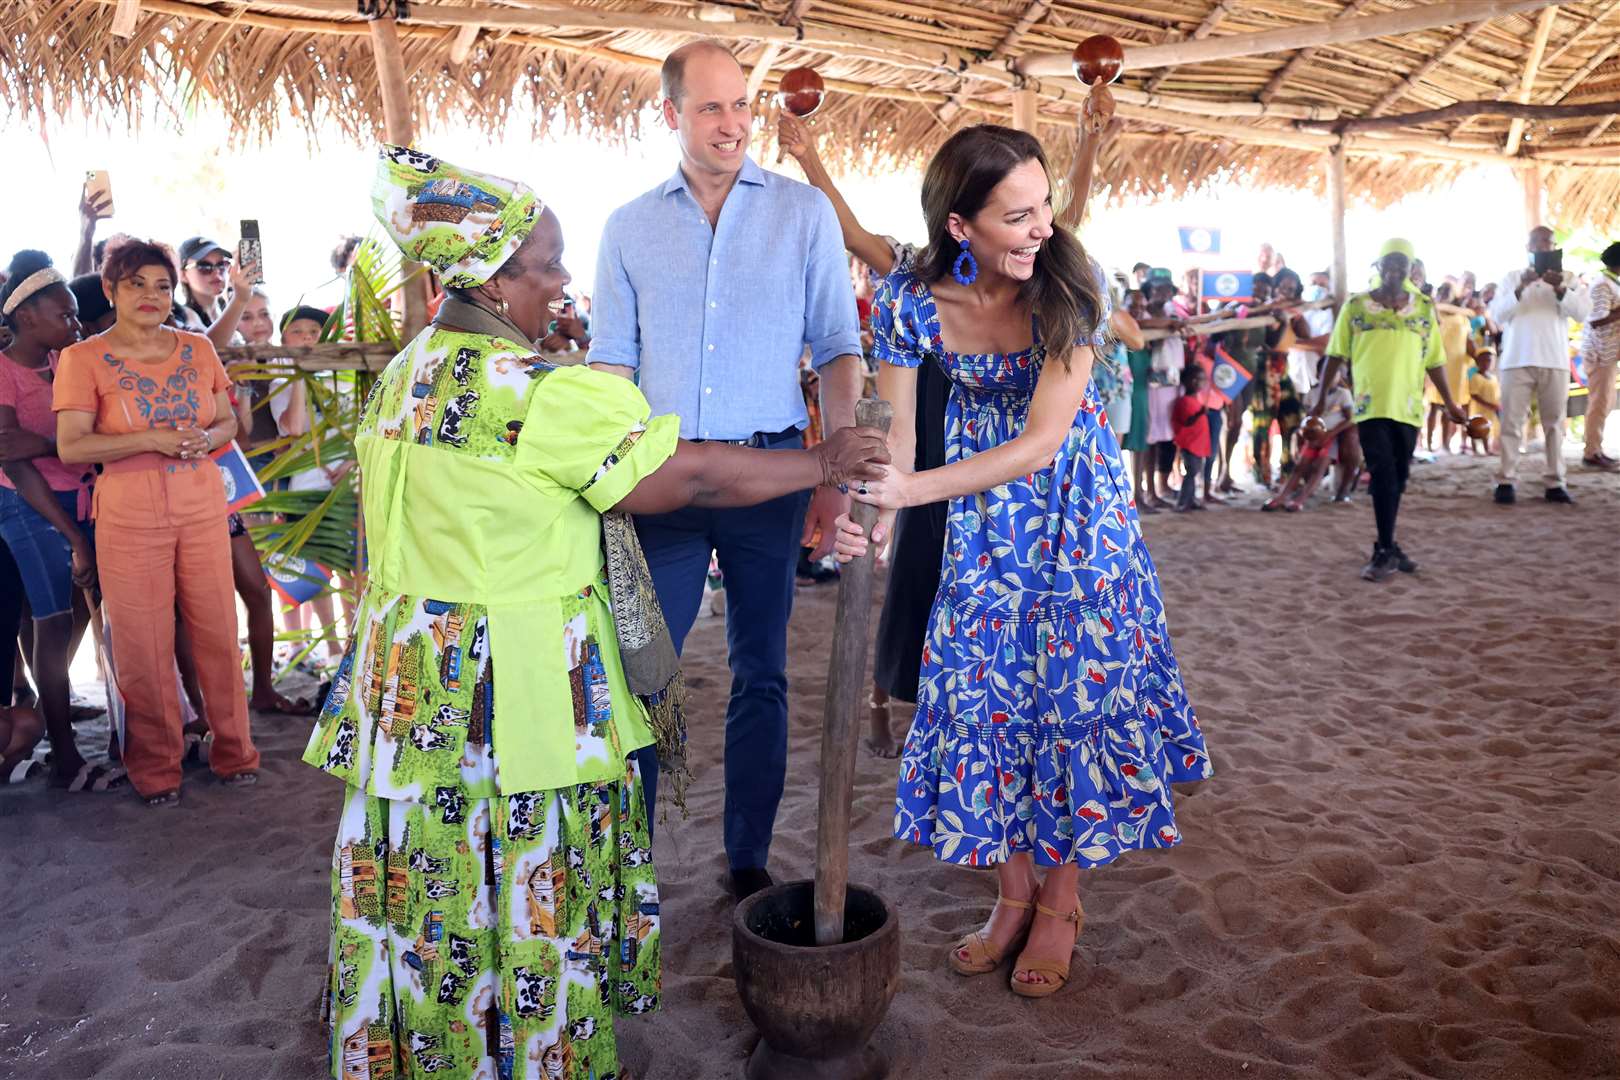 The then-Duke and Duchess of Cambridge attending the Festival of Garifuna Culture in Hopkins, a small village on the coast which is considered the cultural centre of the Garifuna community in Belize, during their tour of the Caribbean on behalf of the Queen to mark her Platinum Jubilee (Chris Jackson/PA)